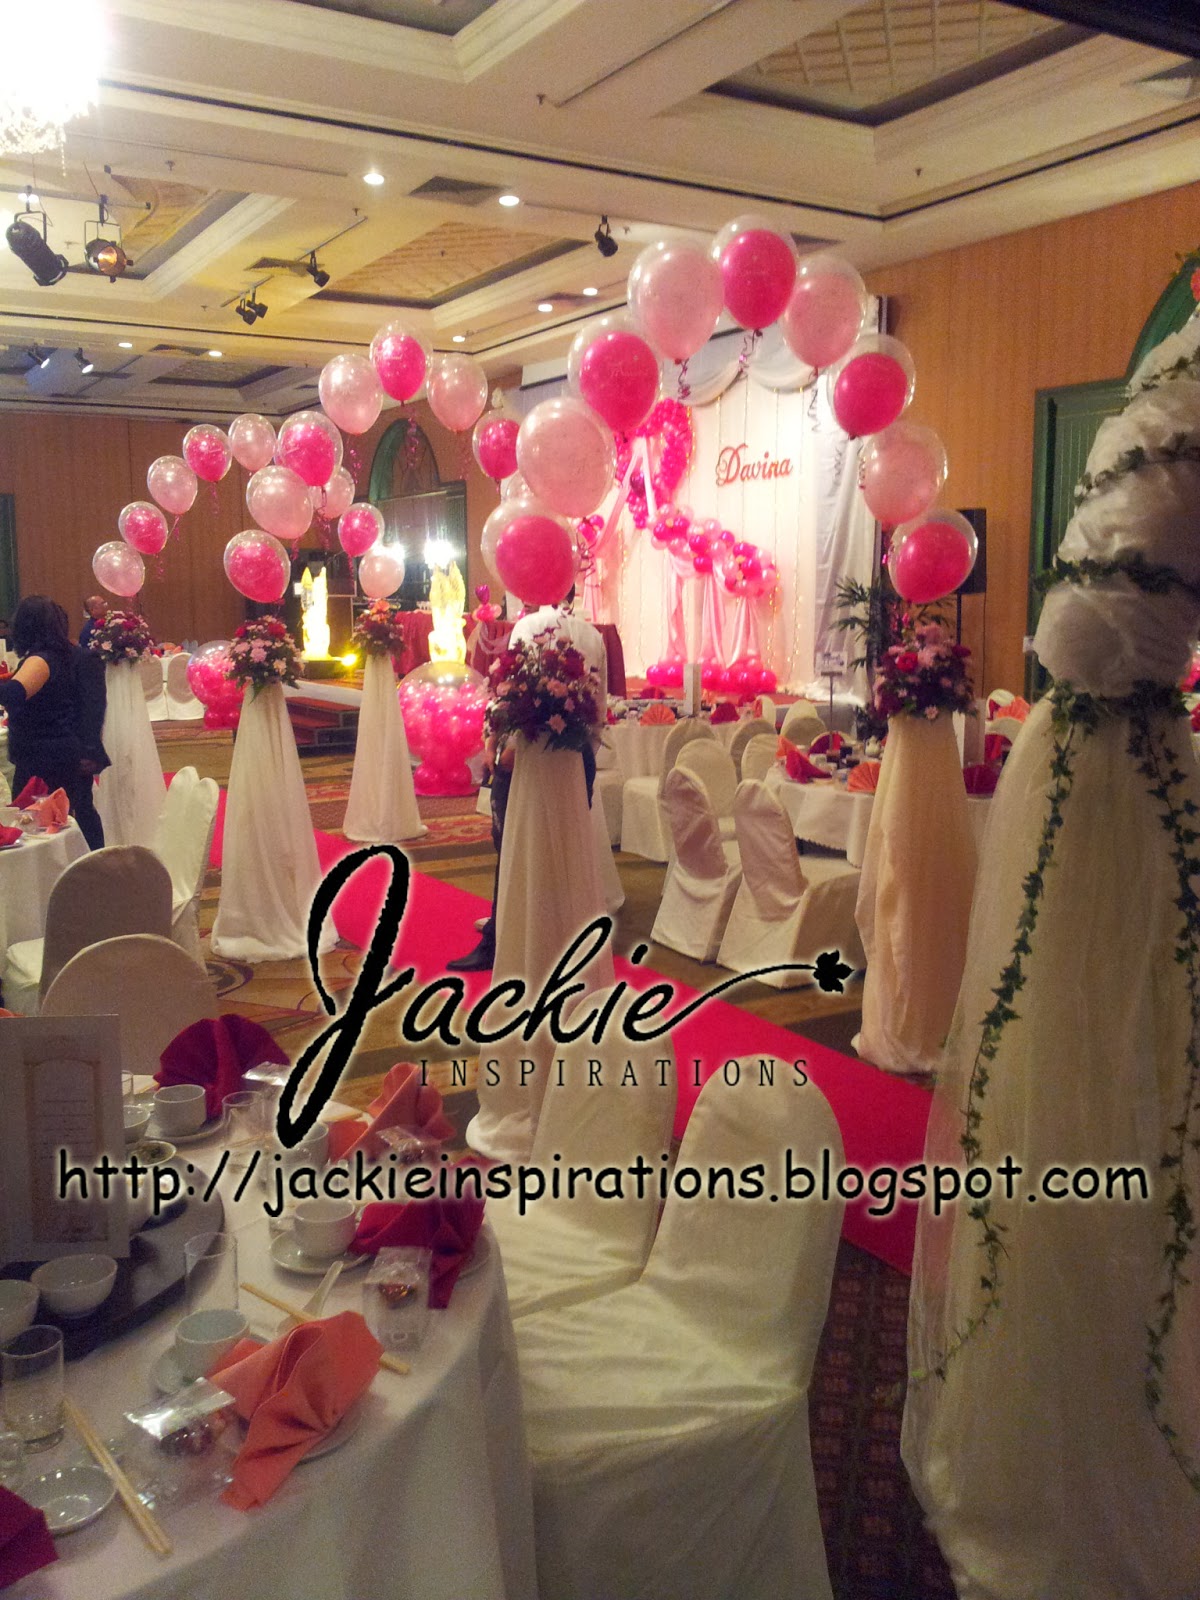 Balloon decorations for weddings birthday parties 